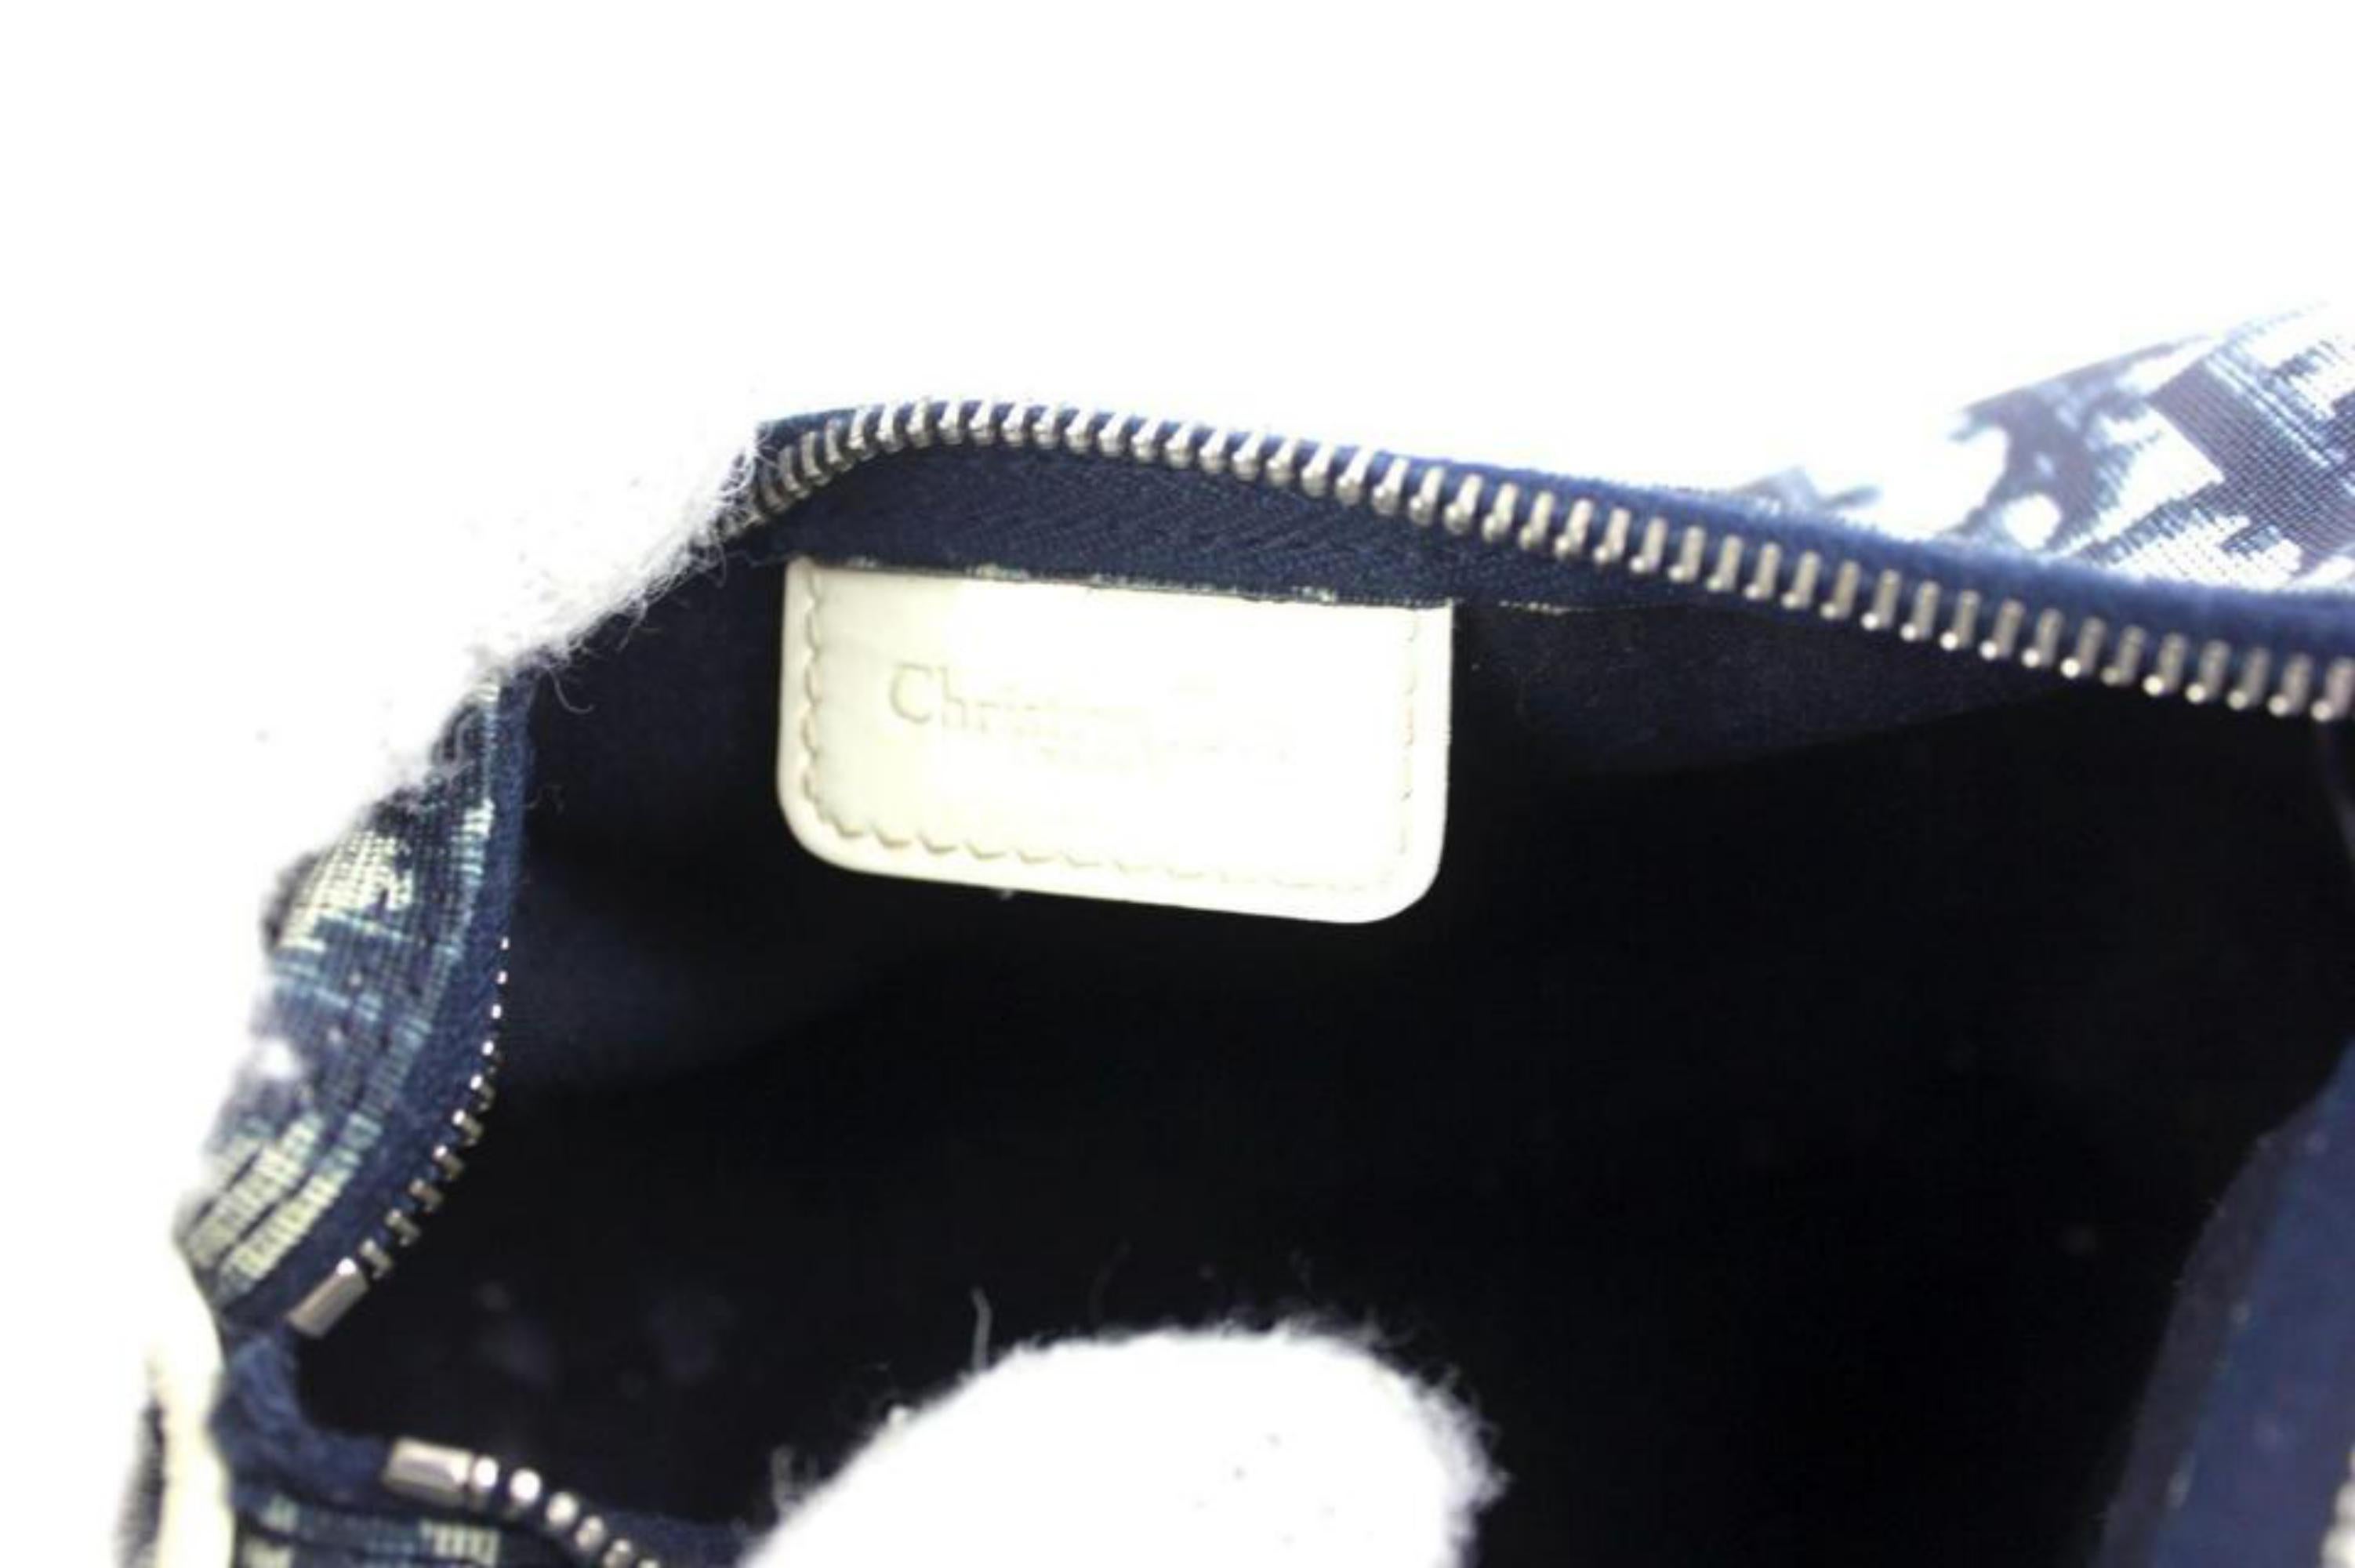 Product NumberDR-5282.1.A
BrandChristian Dior
Date CodeCM 1022
StyleCosmetic Pouch Pochette
MaterialCanvas Leather
ColorBlack Ivory
Country of OriginSpain
Dimensions:
Length : 7 inch /18 cm (approx)
Height : 3.2 inch / 8 cm (approx)
Depth : 3.2 inch